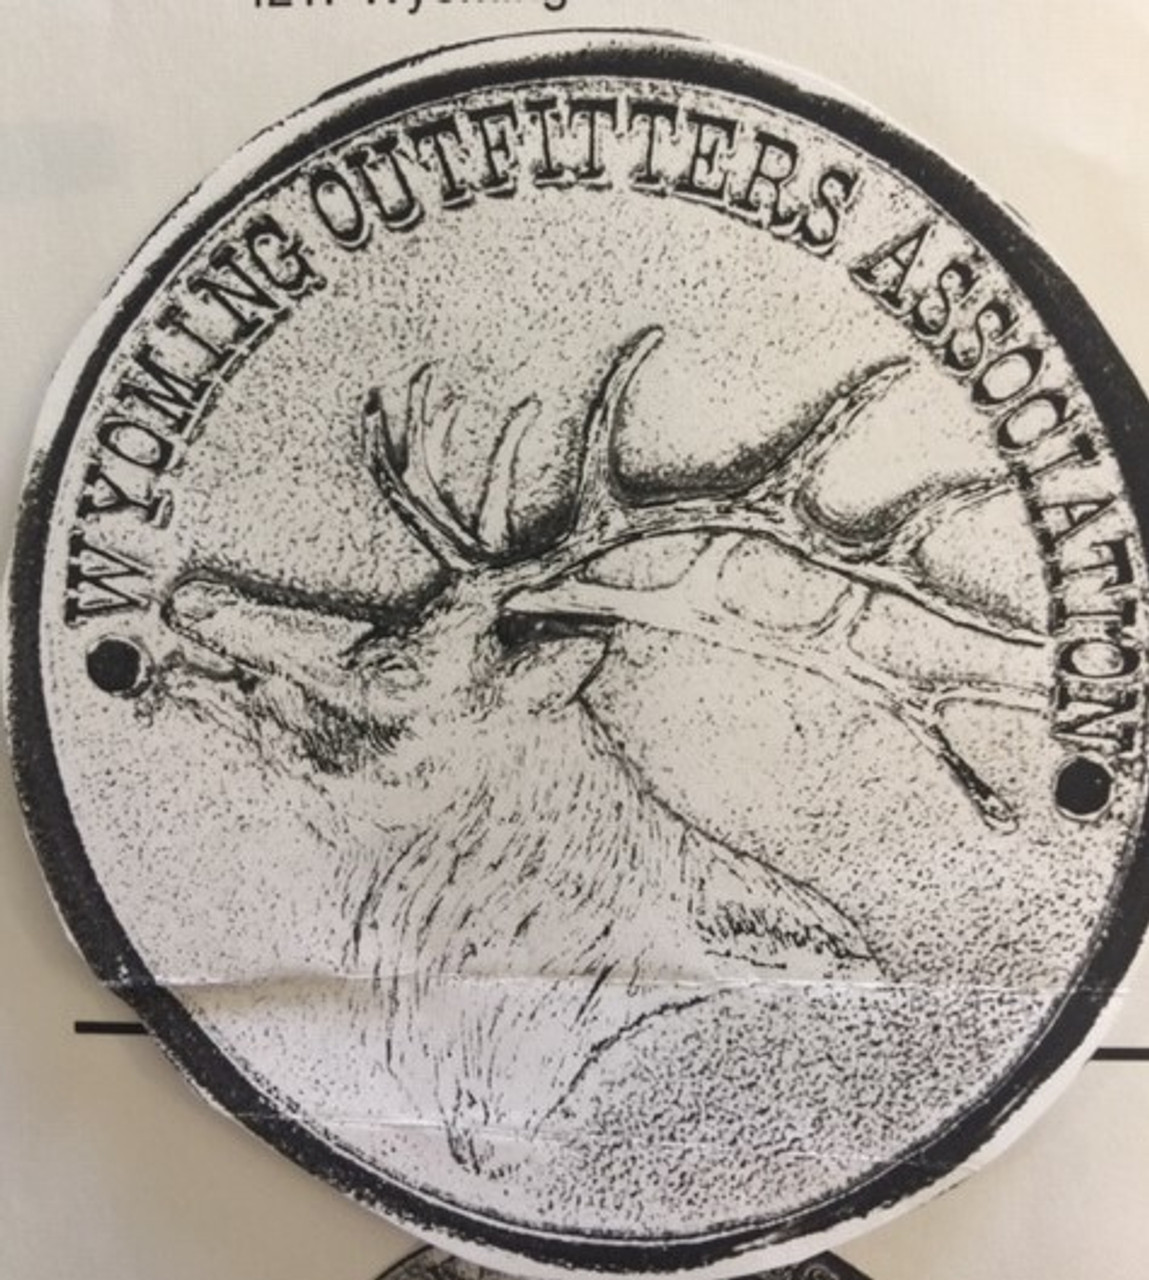 Wyoming Outfitters Association Medallion